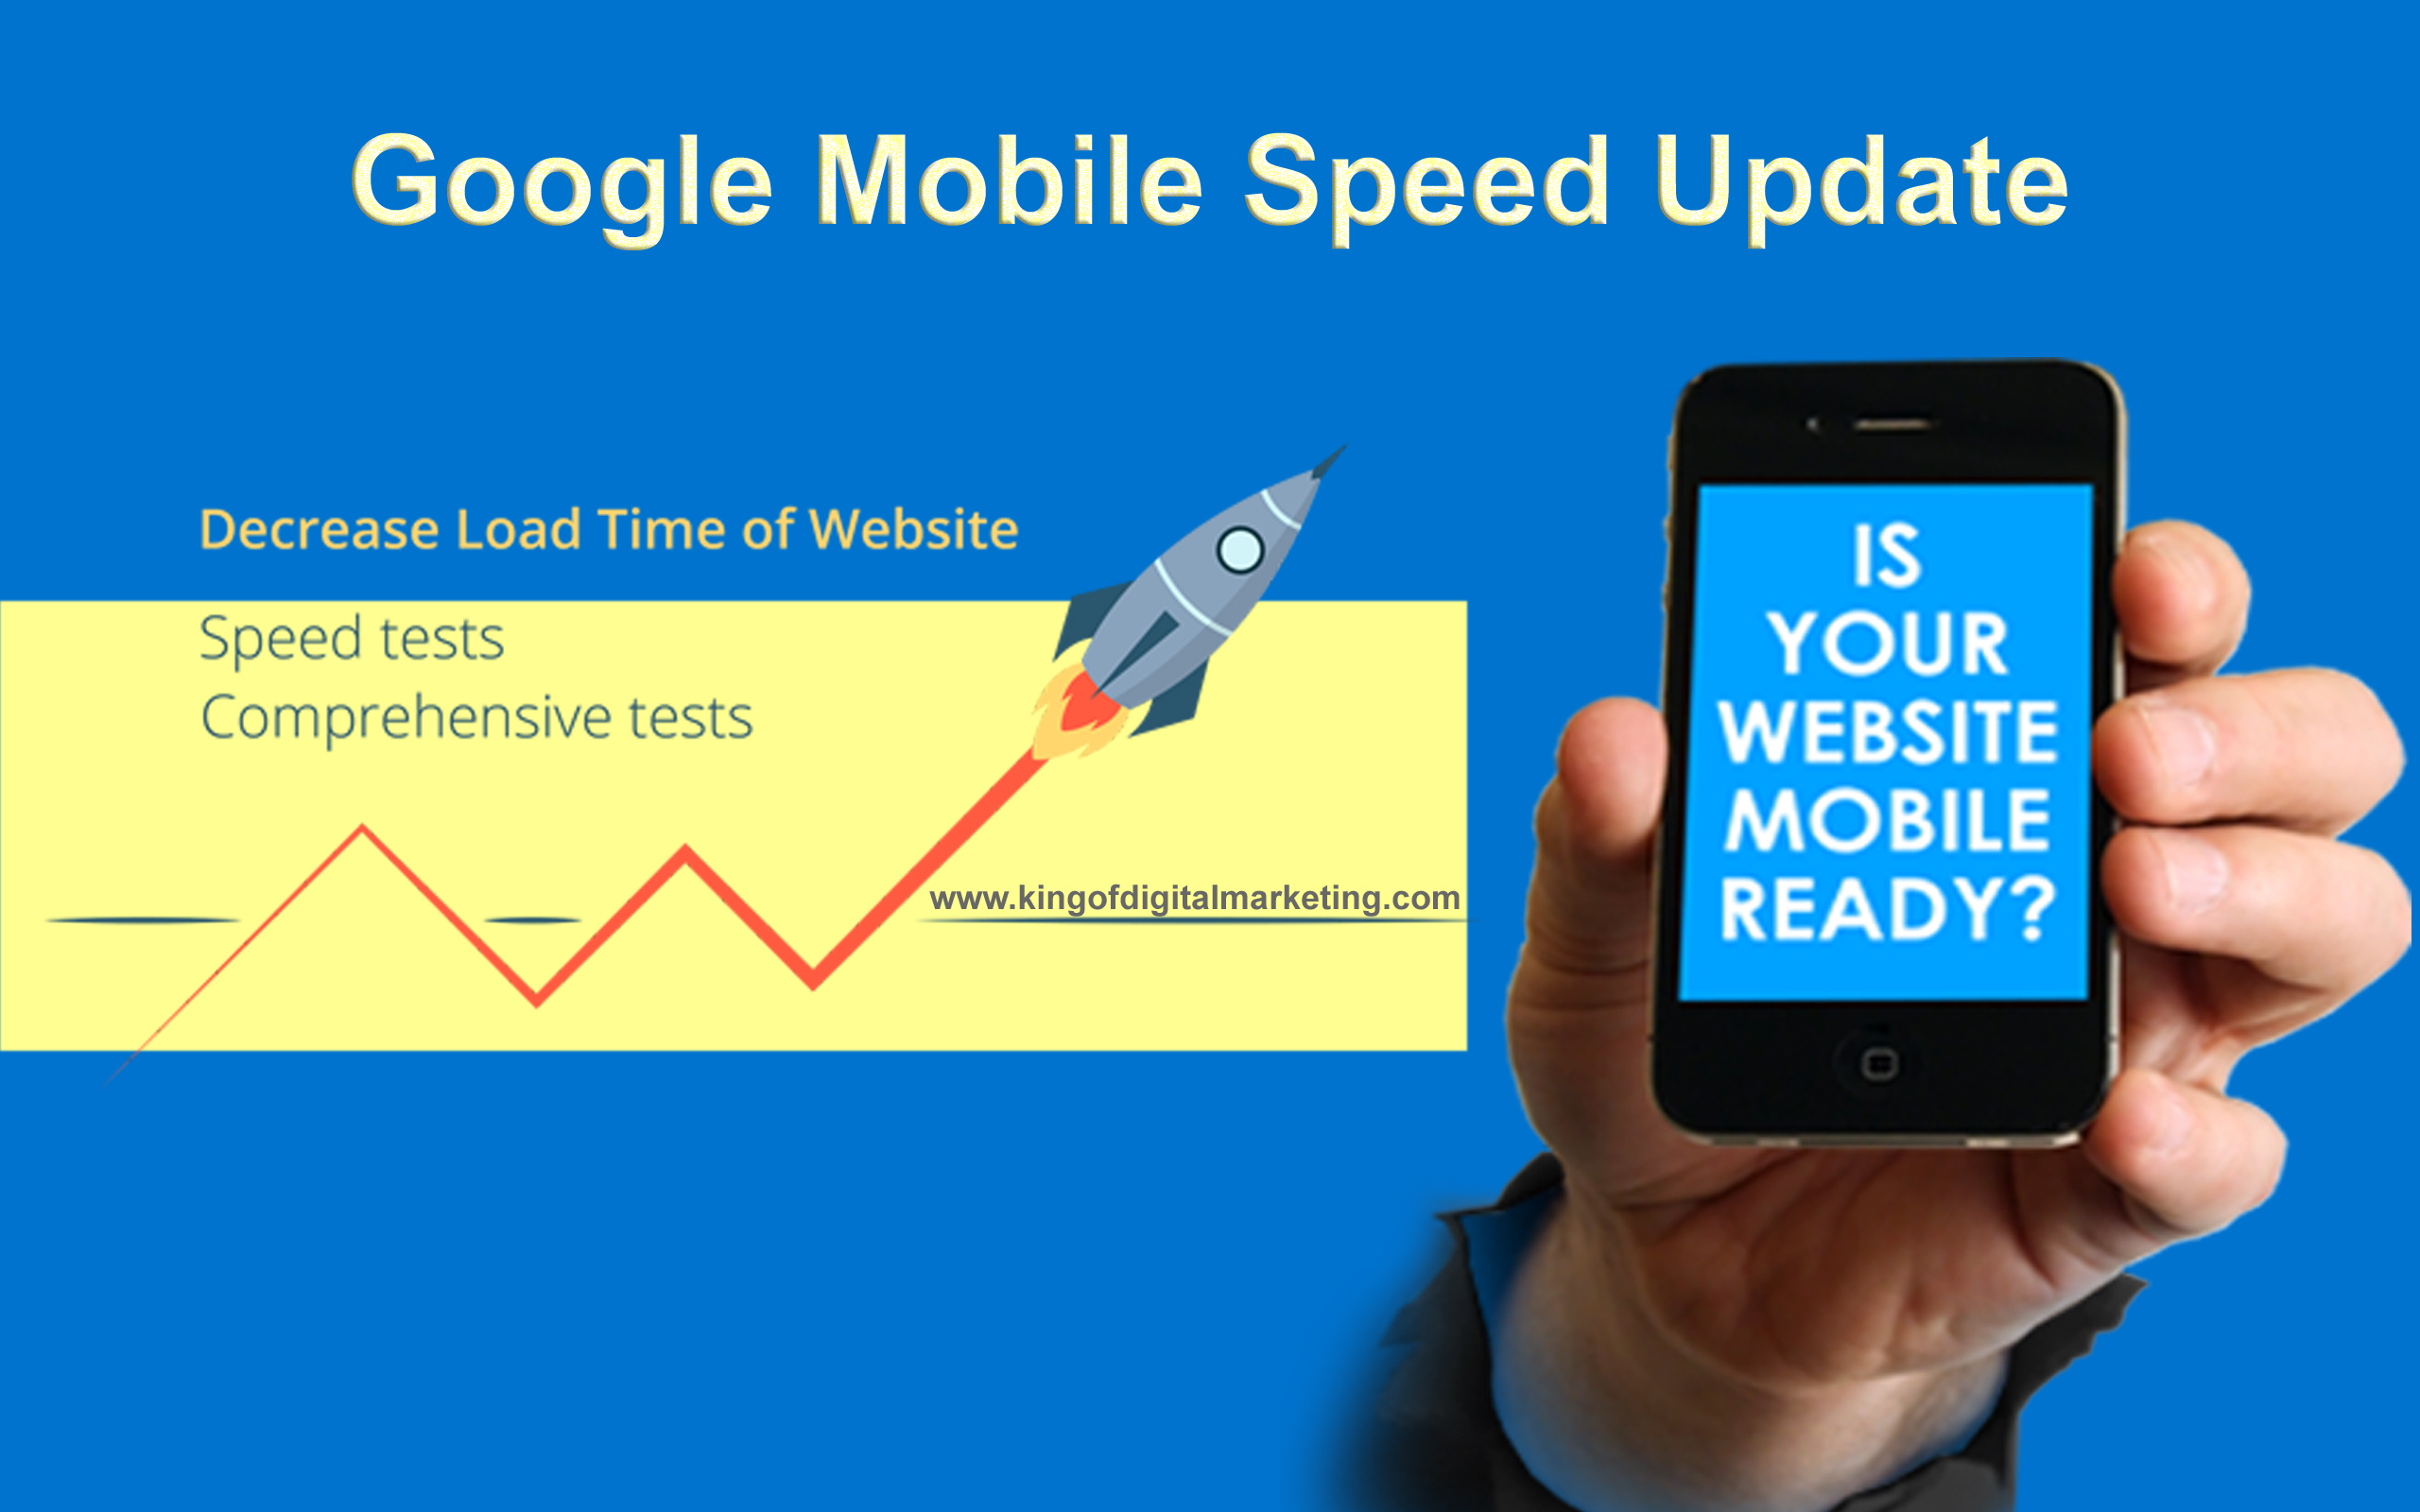 Website speed to affect Google’s mobile search rankings